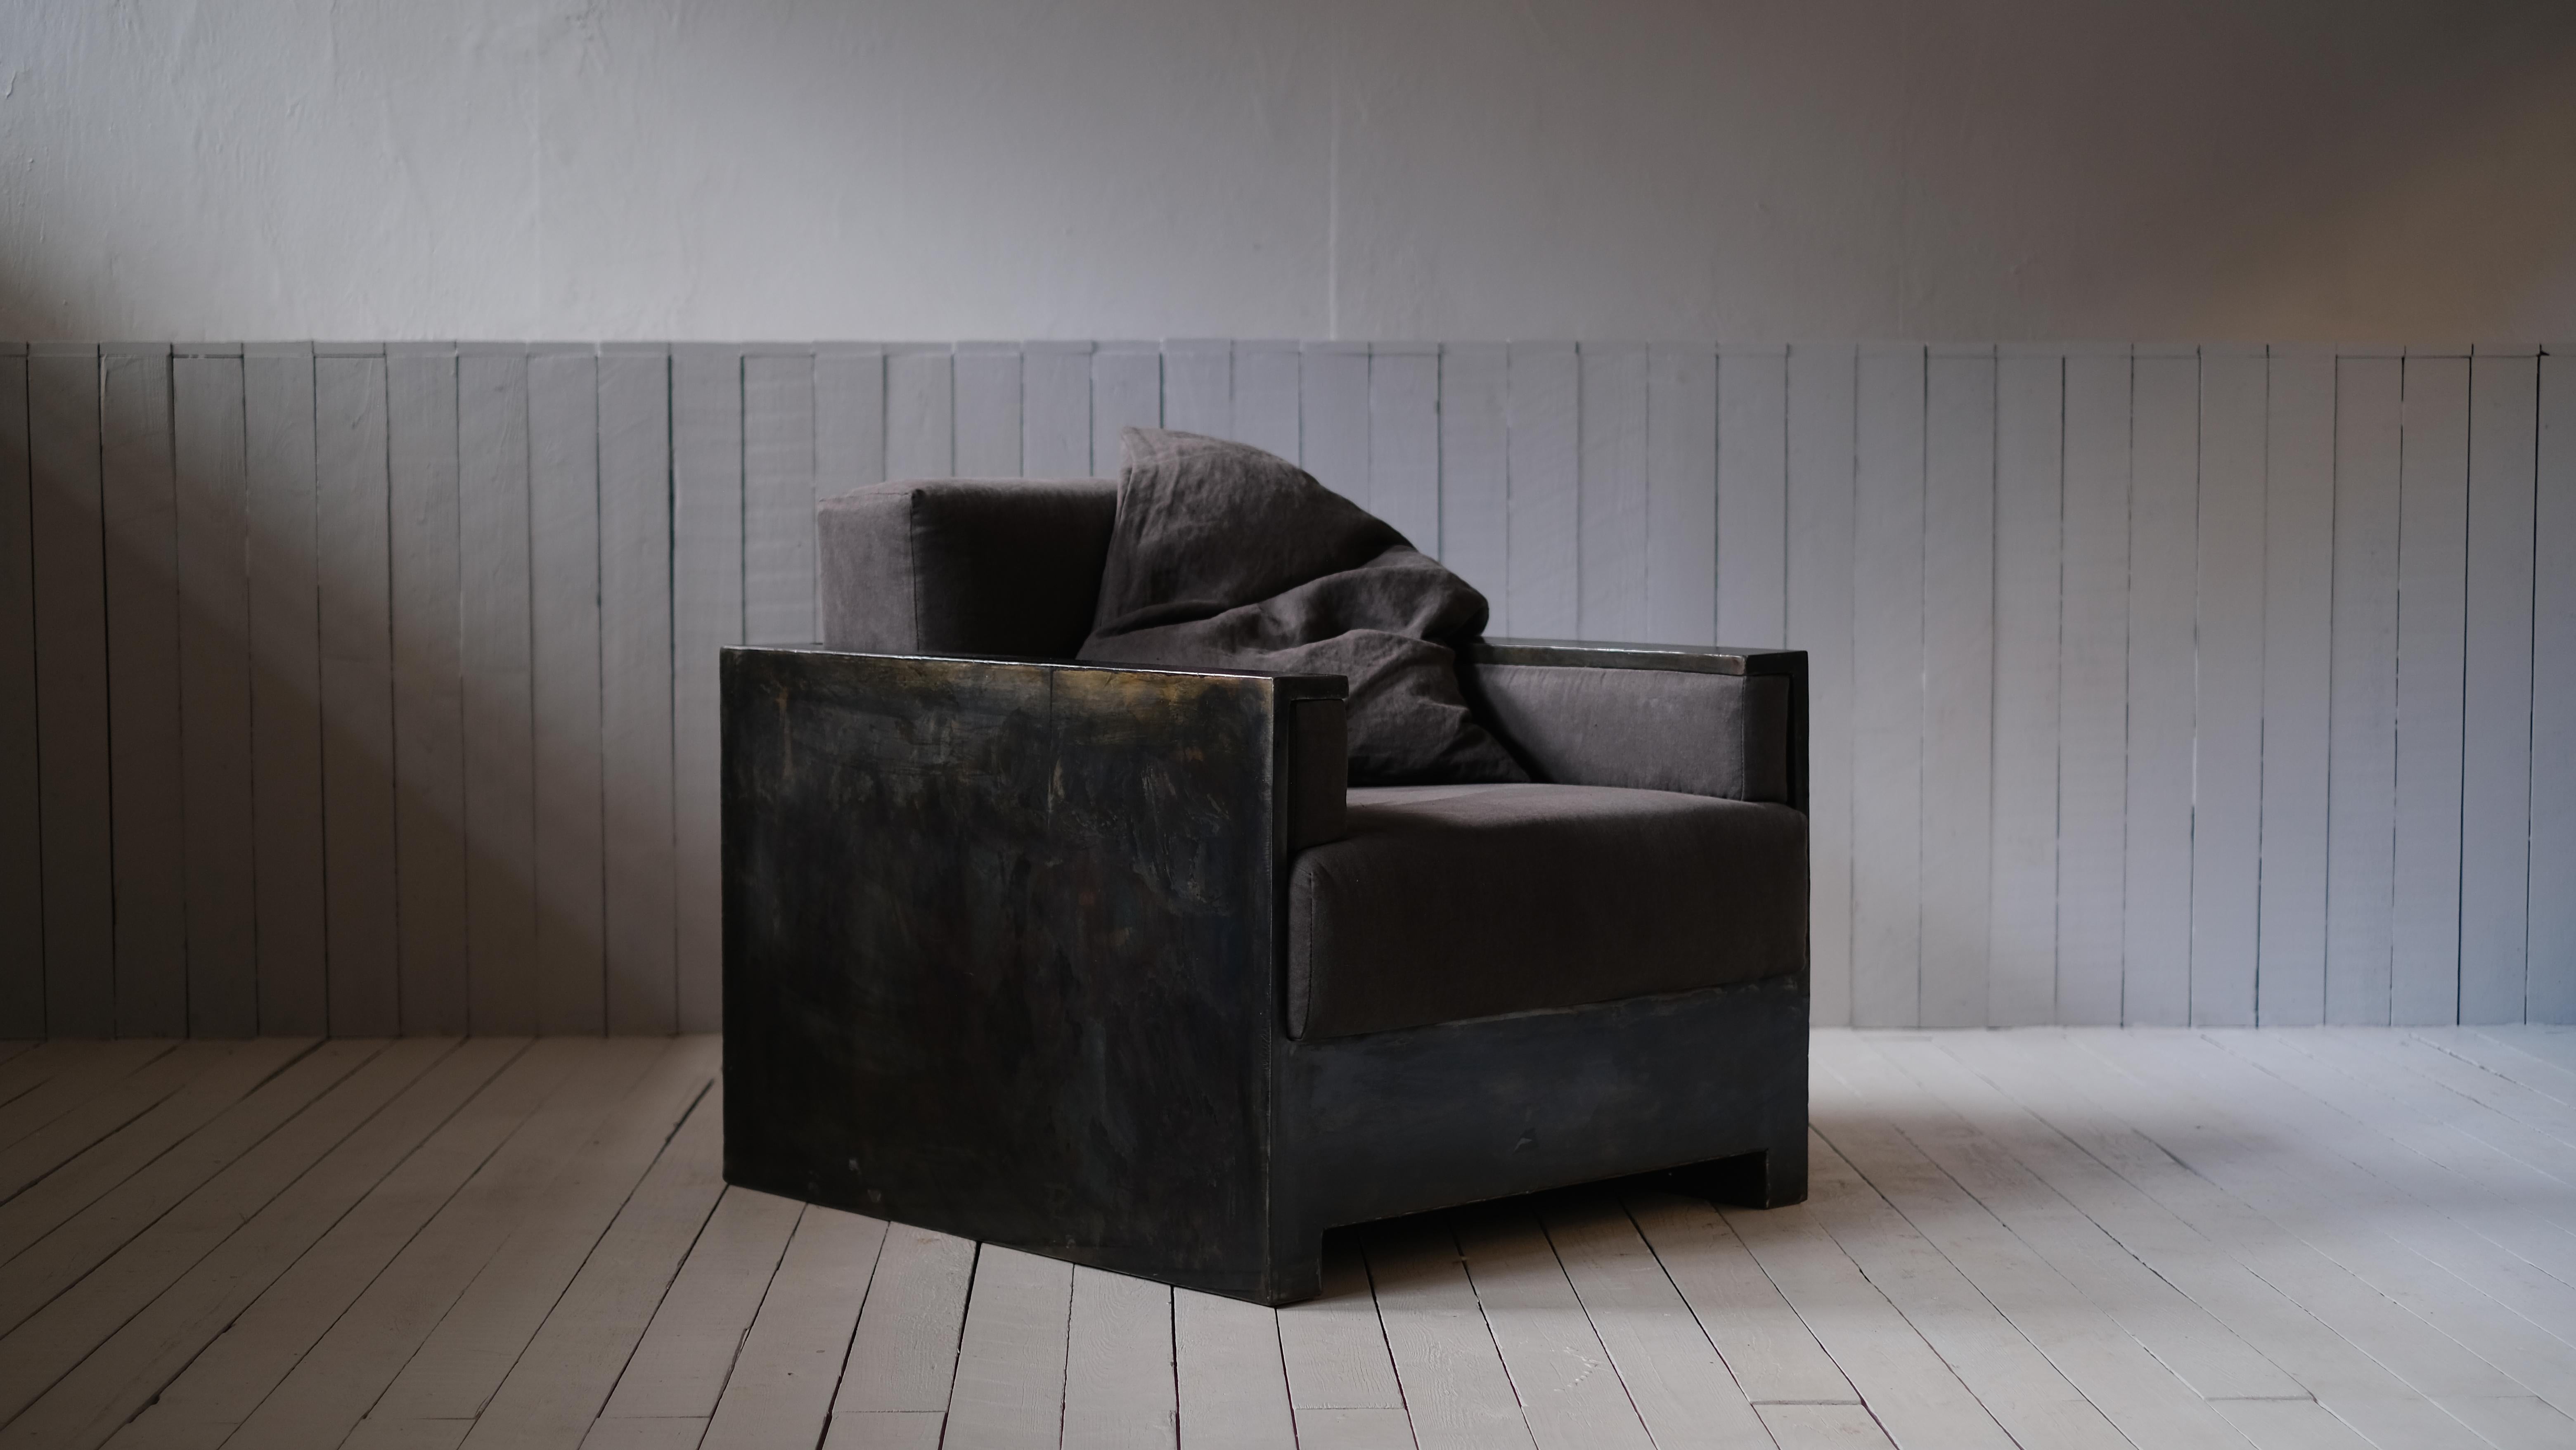 Armchair by Arno Declercq
Limited Edition of 8
Dimensions: D 80 x W 90 cm x H 80 cm
Materials: Japanese natural stone & patinated steel
Signed by Arno Declercq

Arno Declercq
Belgian designer and art dealer who makes bespoke objects with